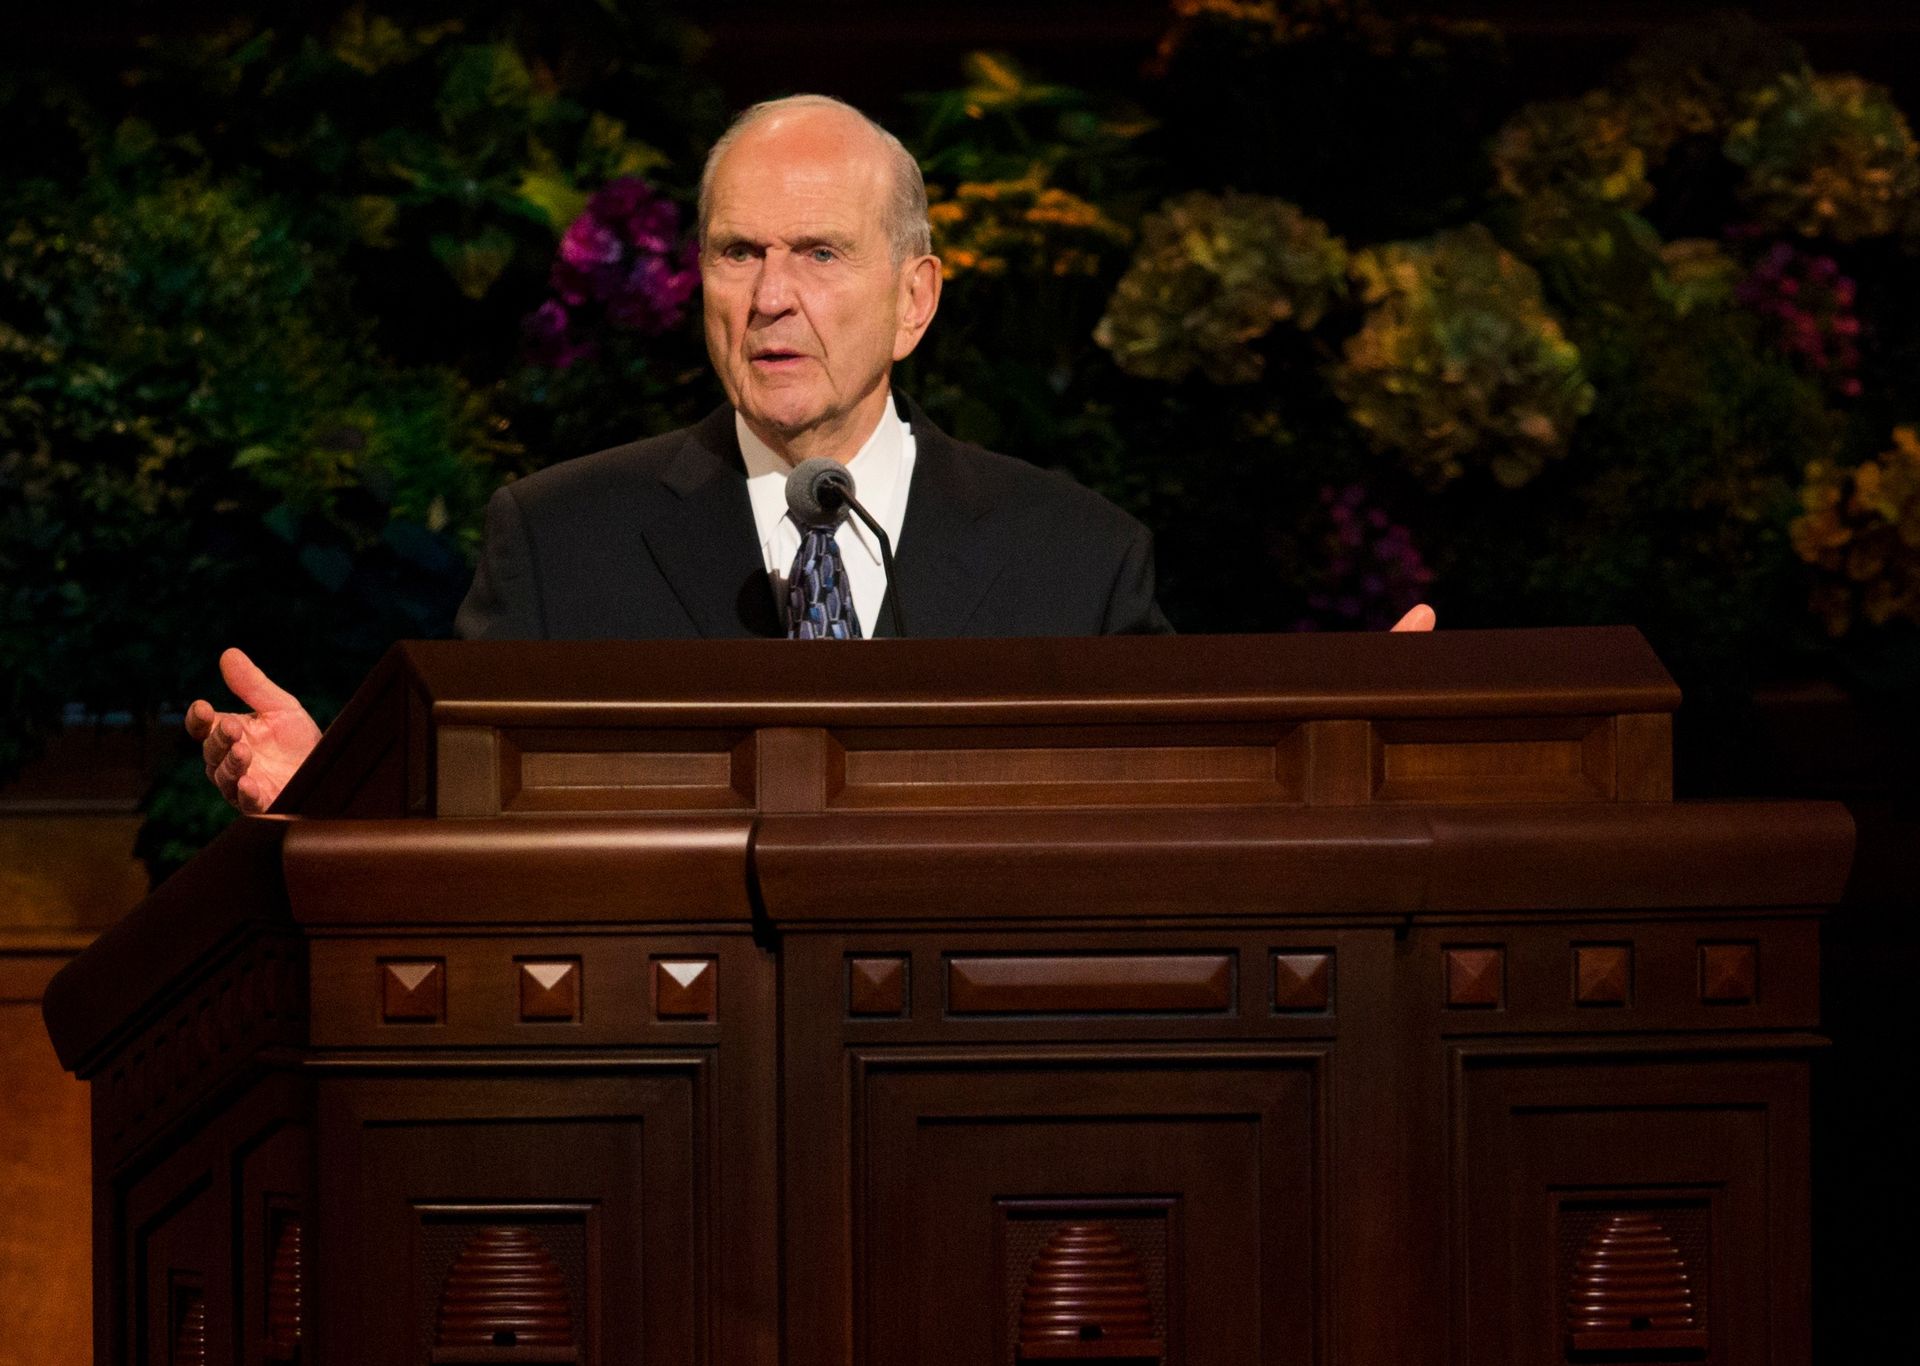 Russell M. Nelson speaking at the pulpit in general conference.